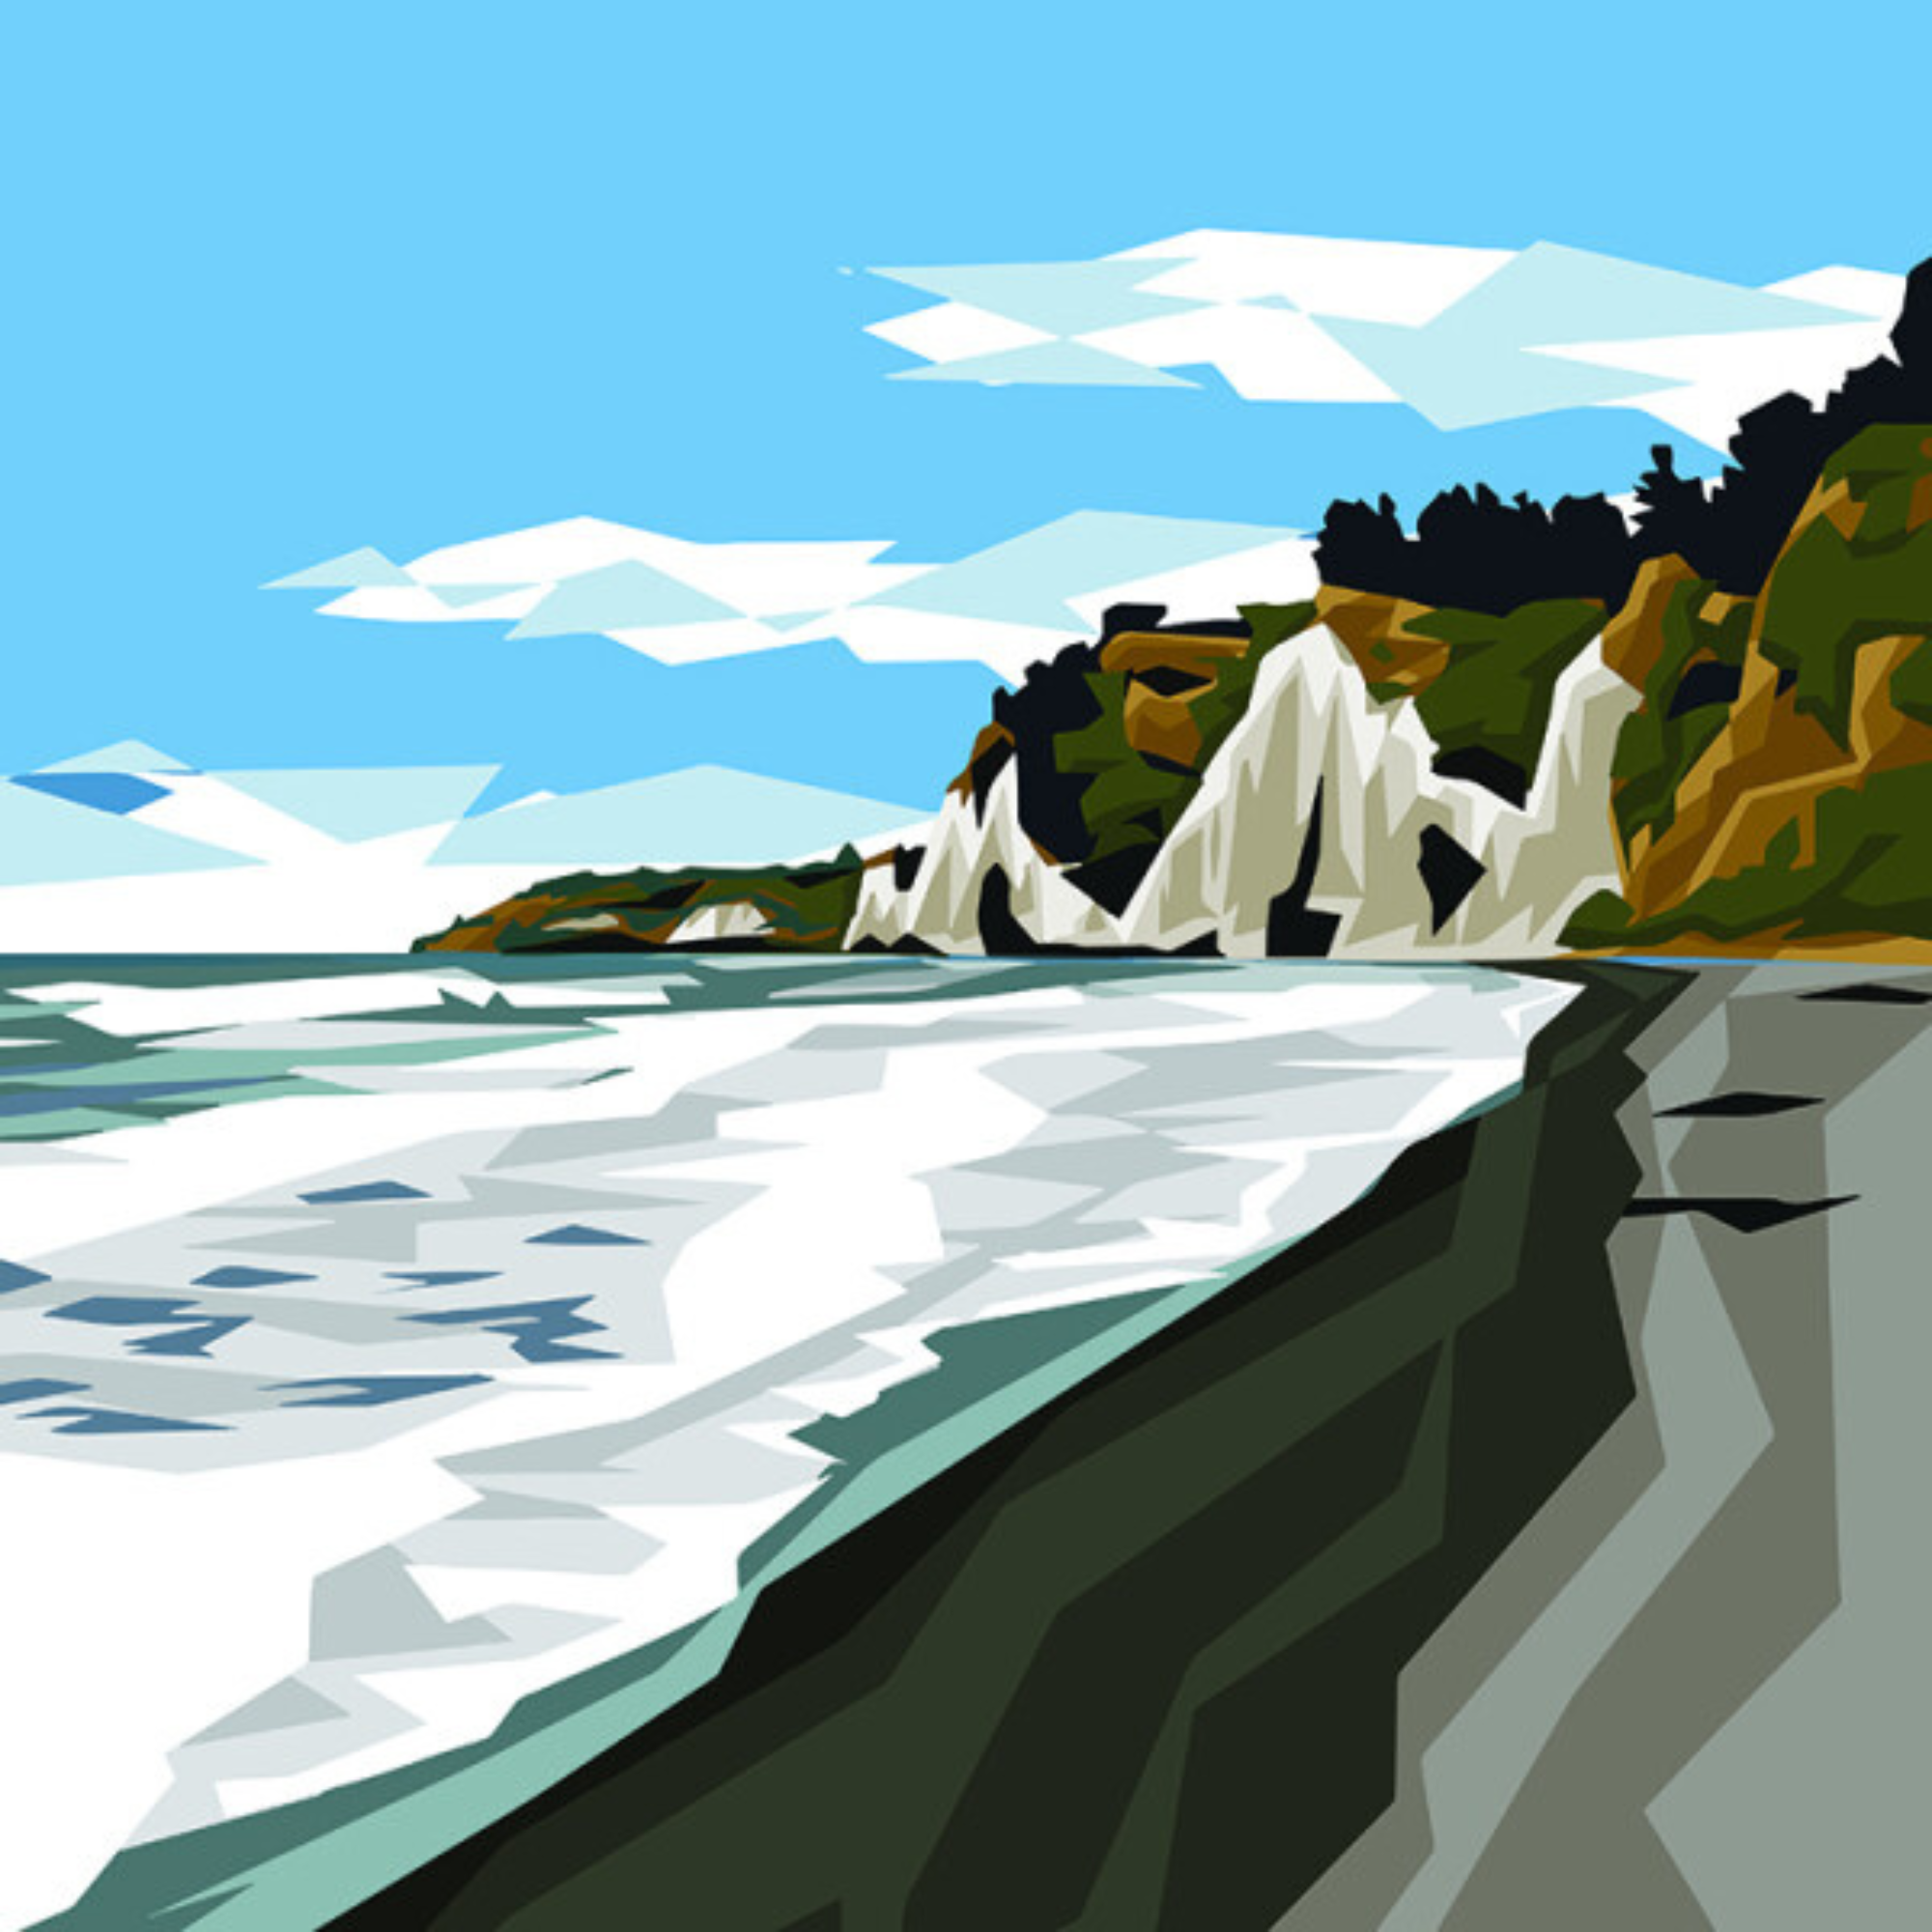 GORE BAY | CANVAS STRETCHED READY TO HANG | IRA MITCHELL  | NZ MADE